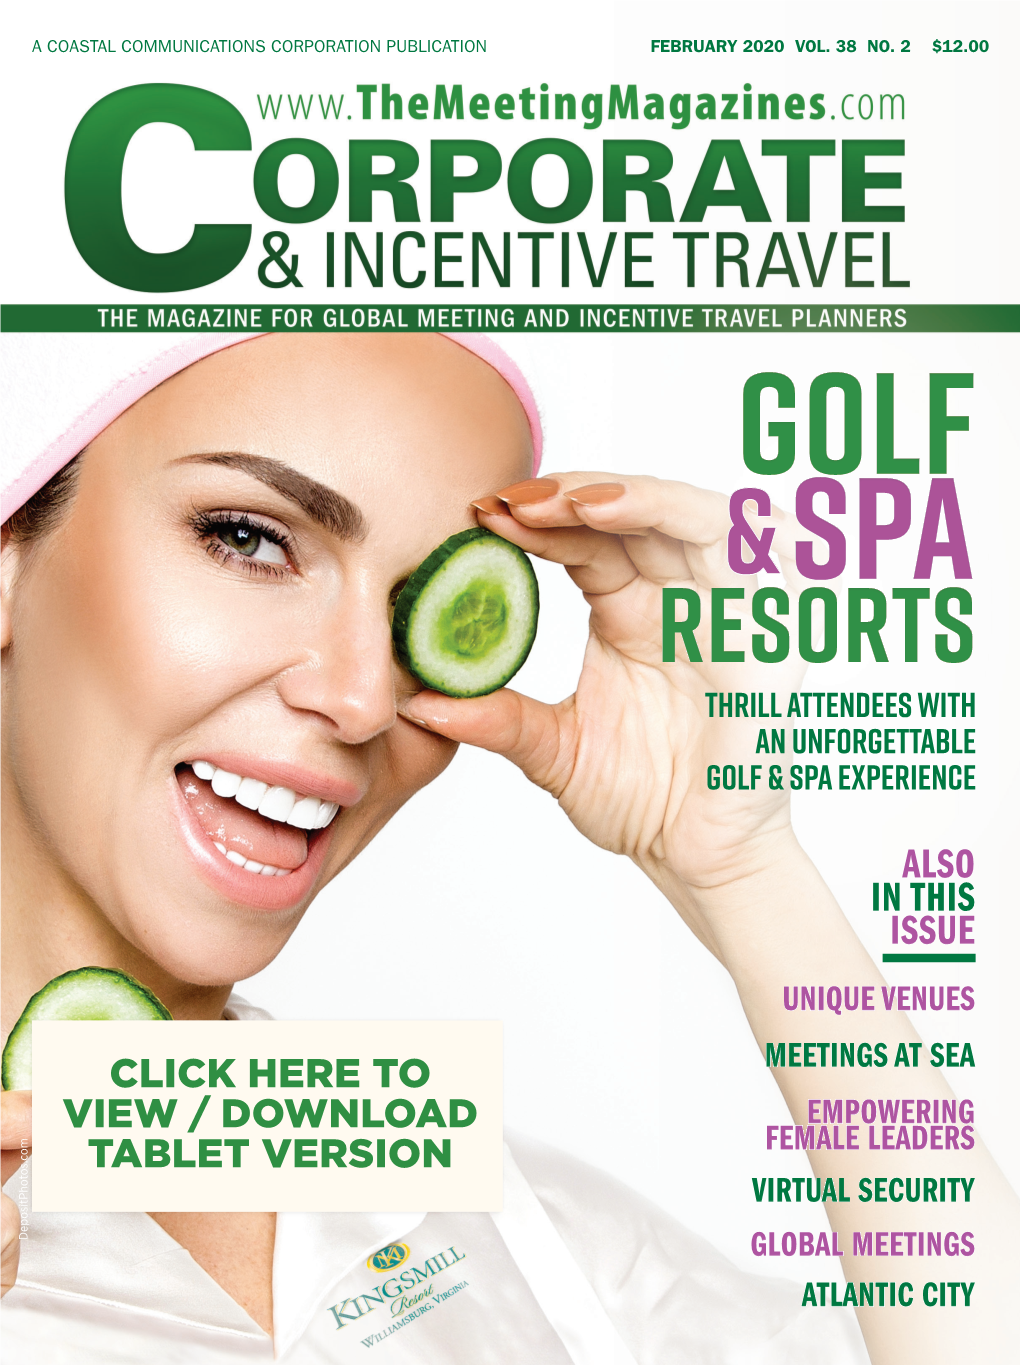 GOLF &SPA RESORTS Thrill Attendees with an Unforgettable Golf & Spa Experience